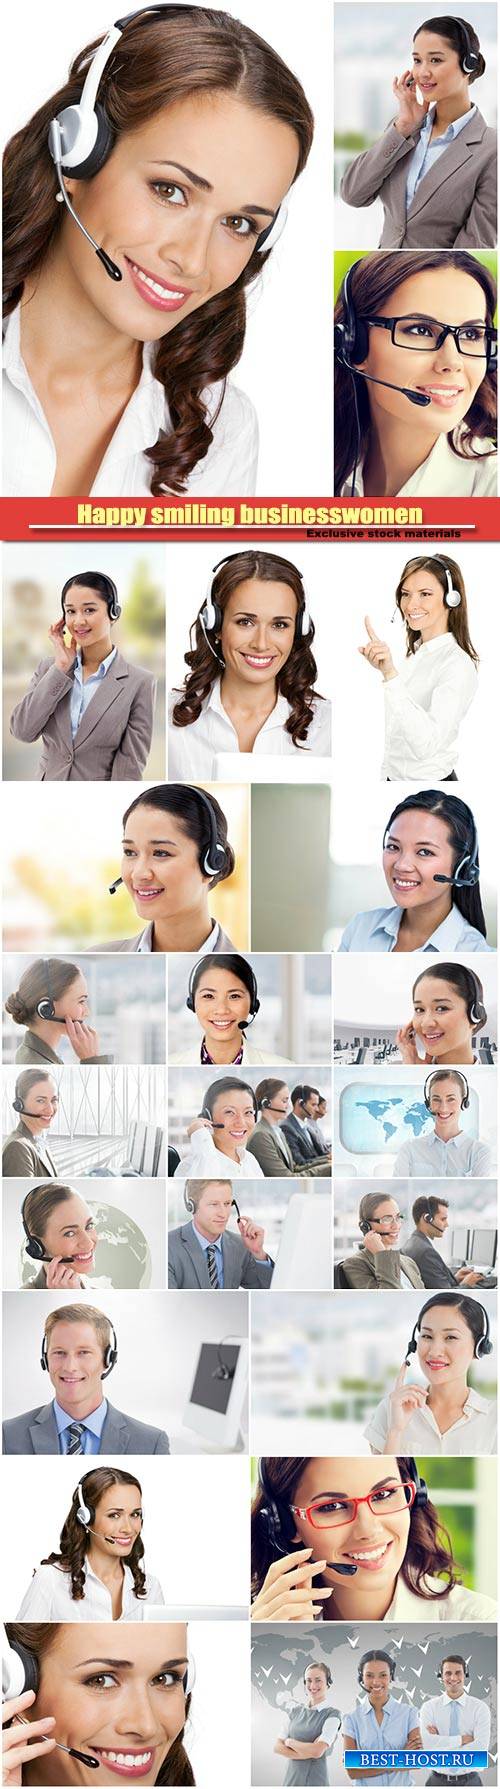 Happy smiling businesswoman and businessmen operator or call center worker